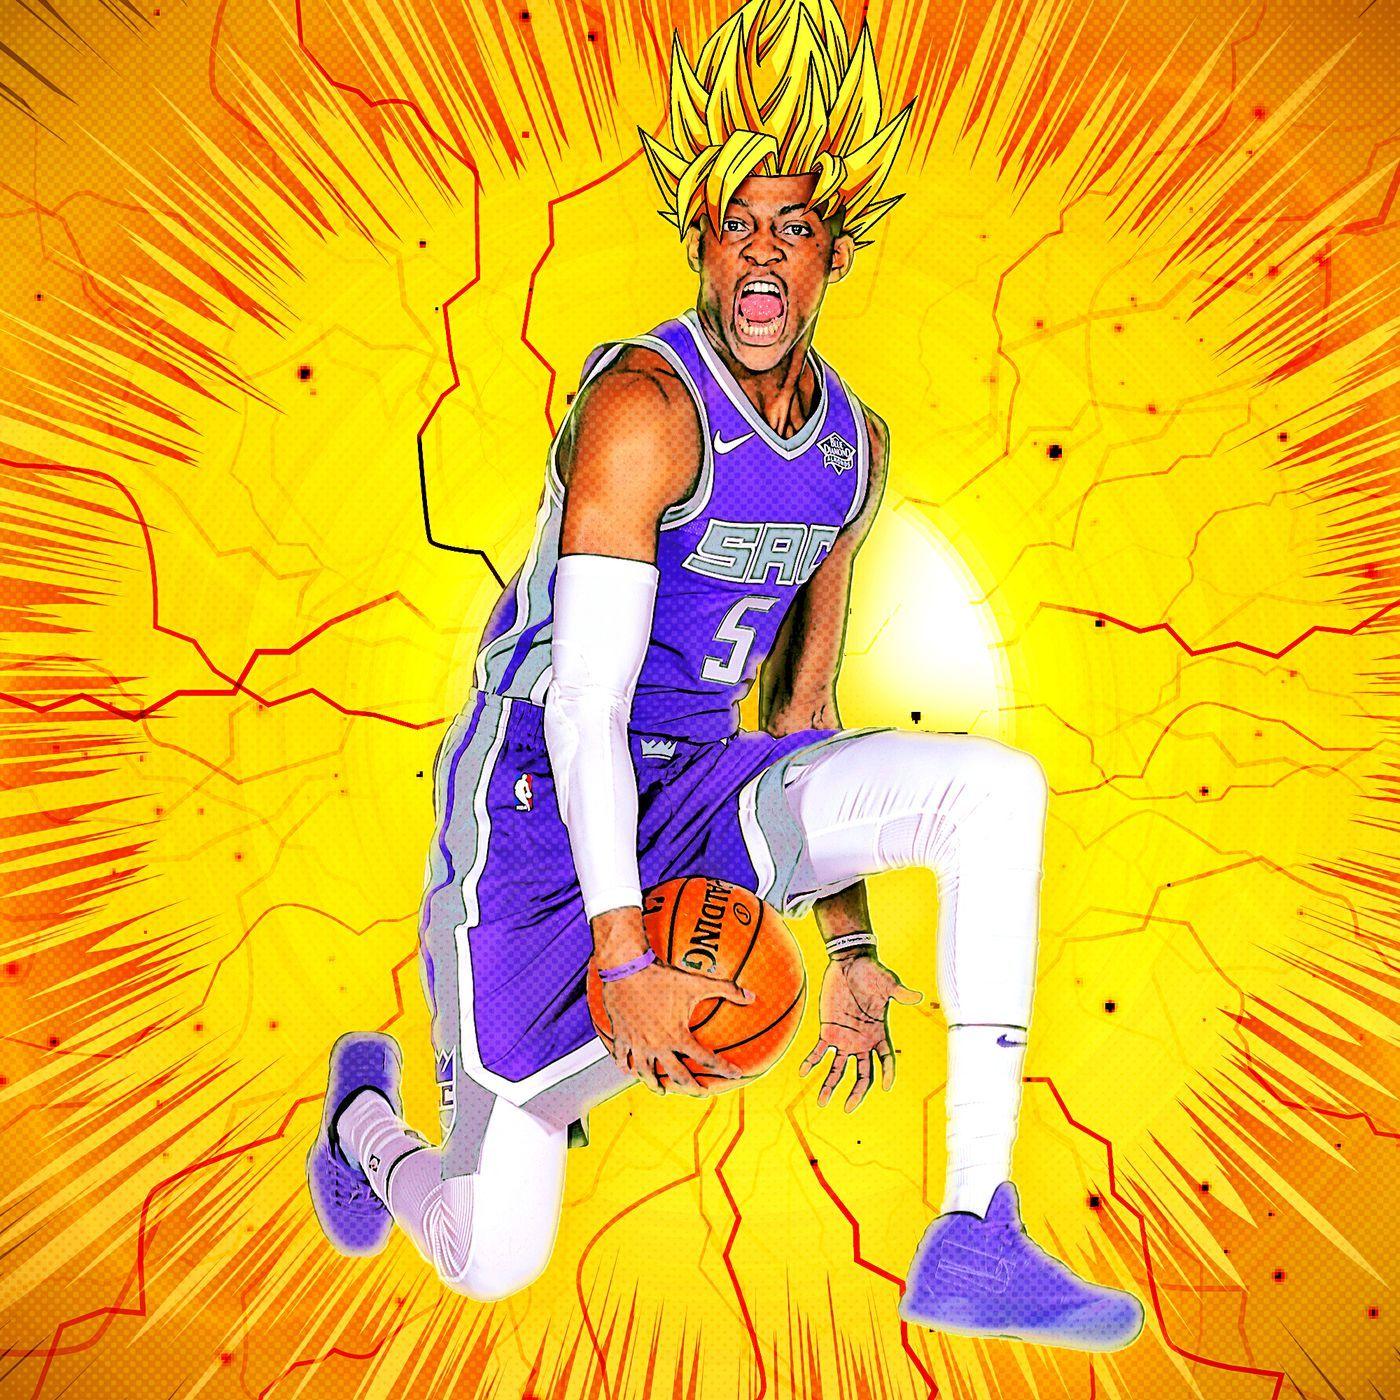 Can De'Aaron Fox be the King in the NorCal?